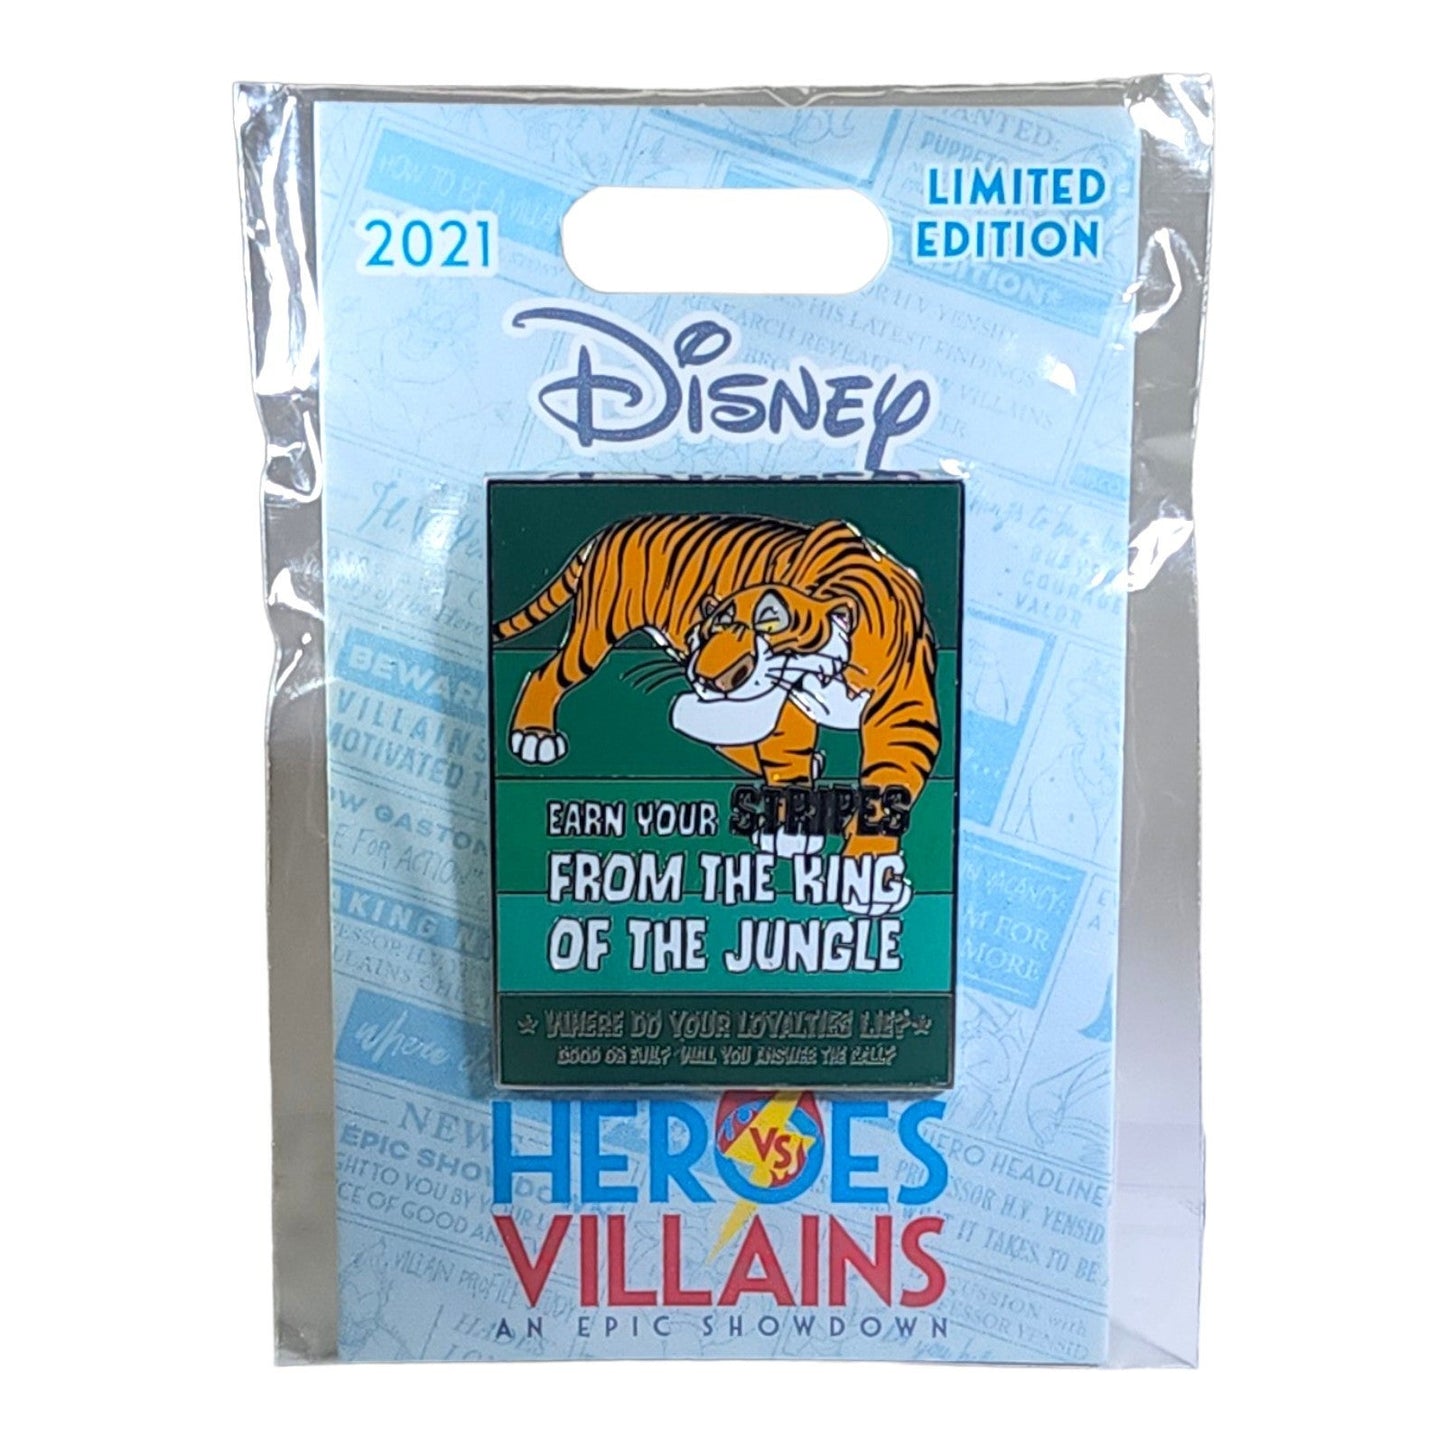 Shere Khan Recruitment Poster Series  - Heroes vs Villains Pin Event  - Limited Edition 2000